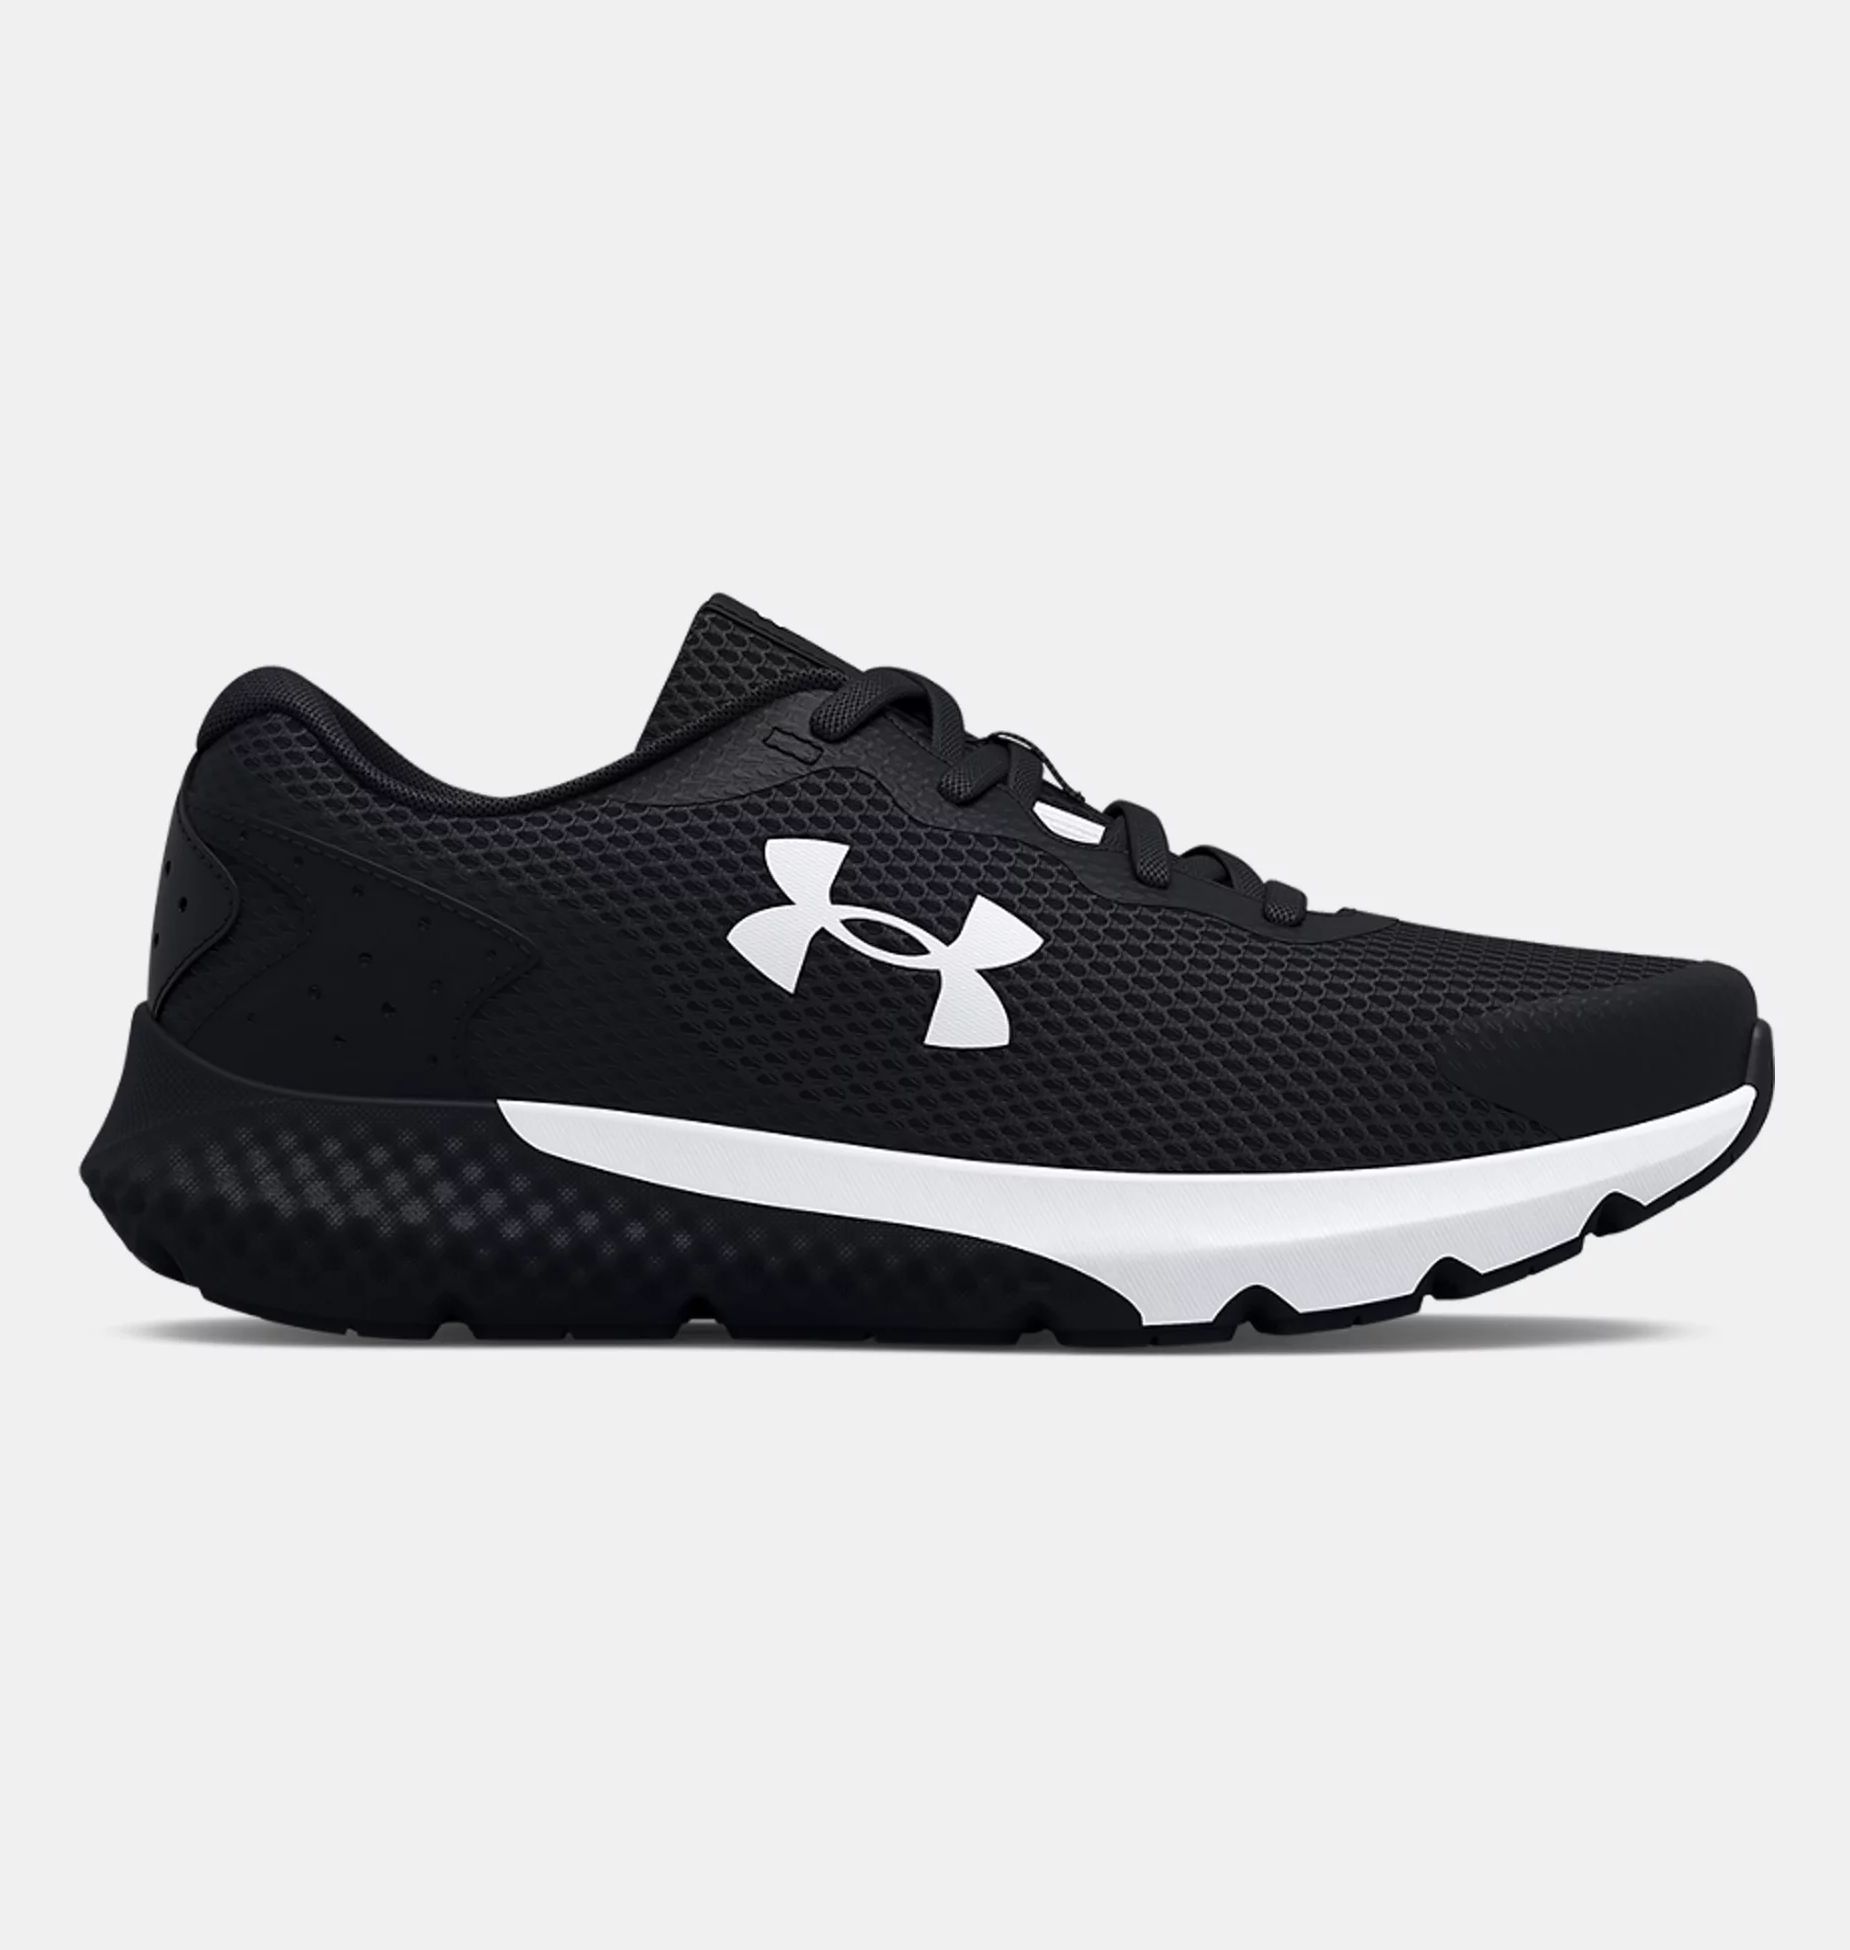 Fitness Shoes -  under armour Rogue 3 AL Running Shoes